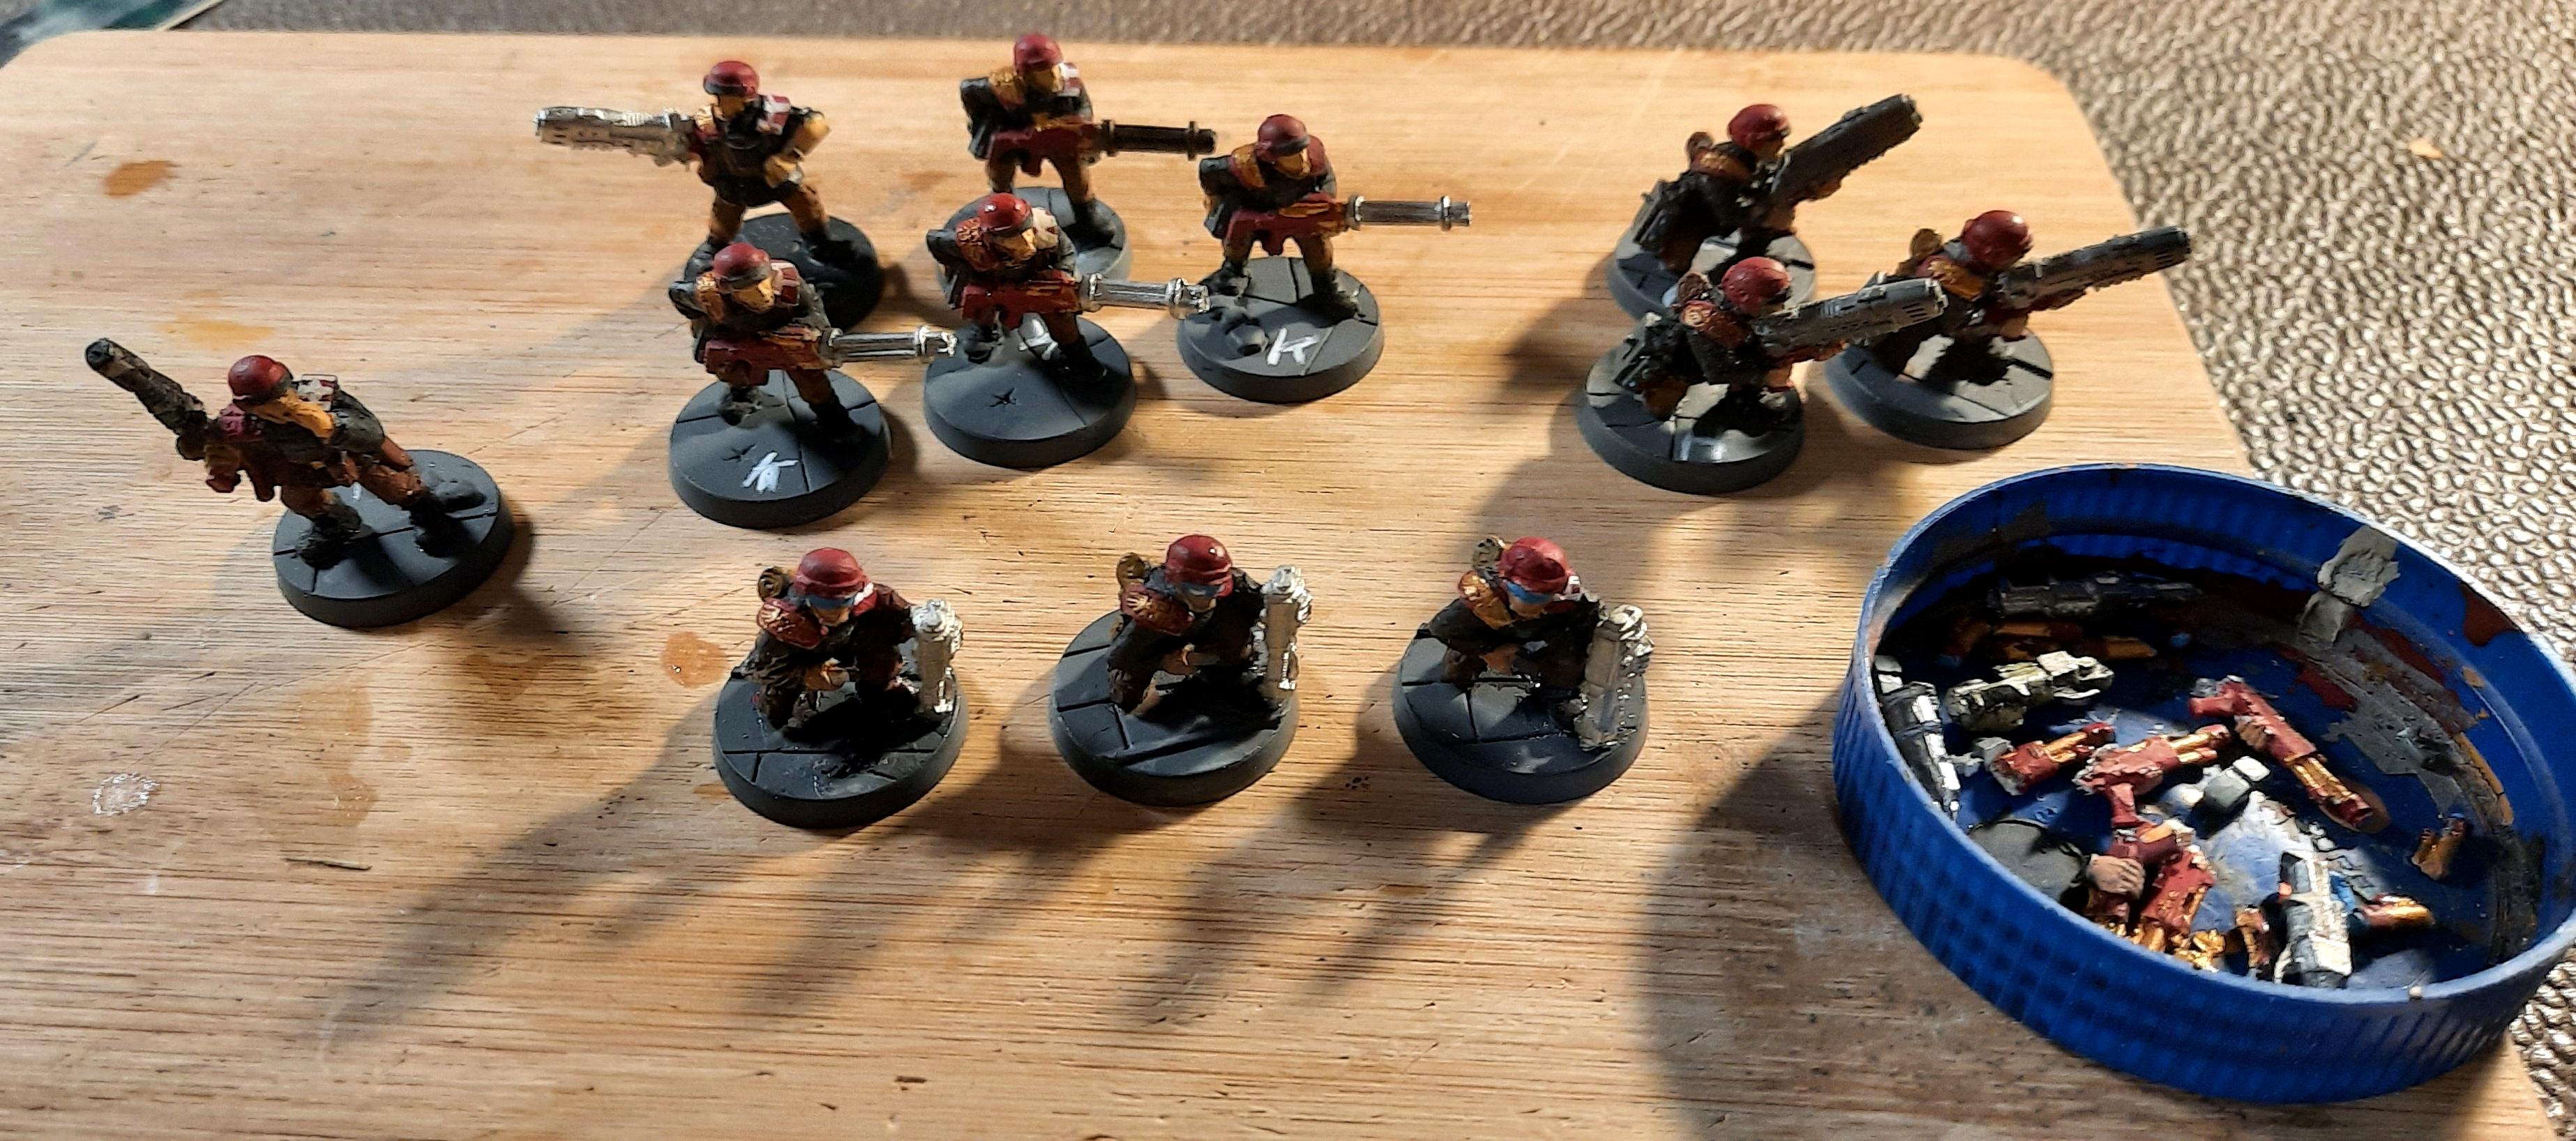 2nd Edition, Army, Cadians, Conversion, Imperial Guard, Metal, Plasma Gun, Scions, Storm Troopers